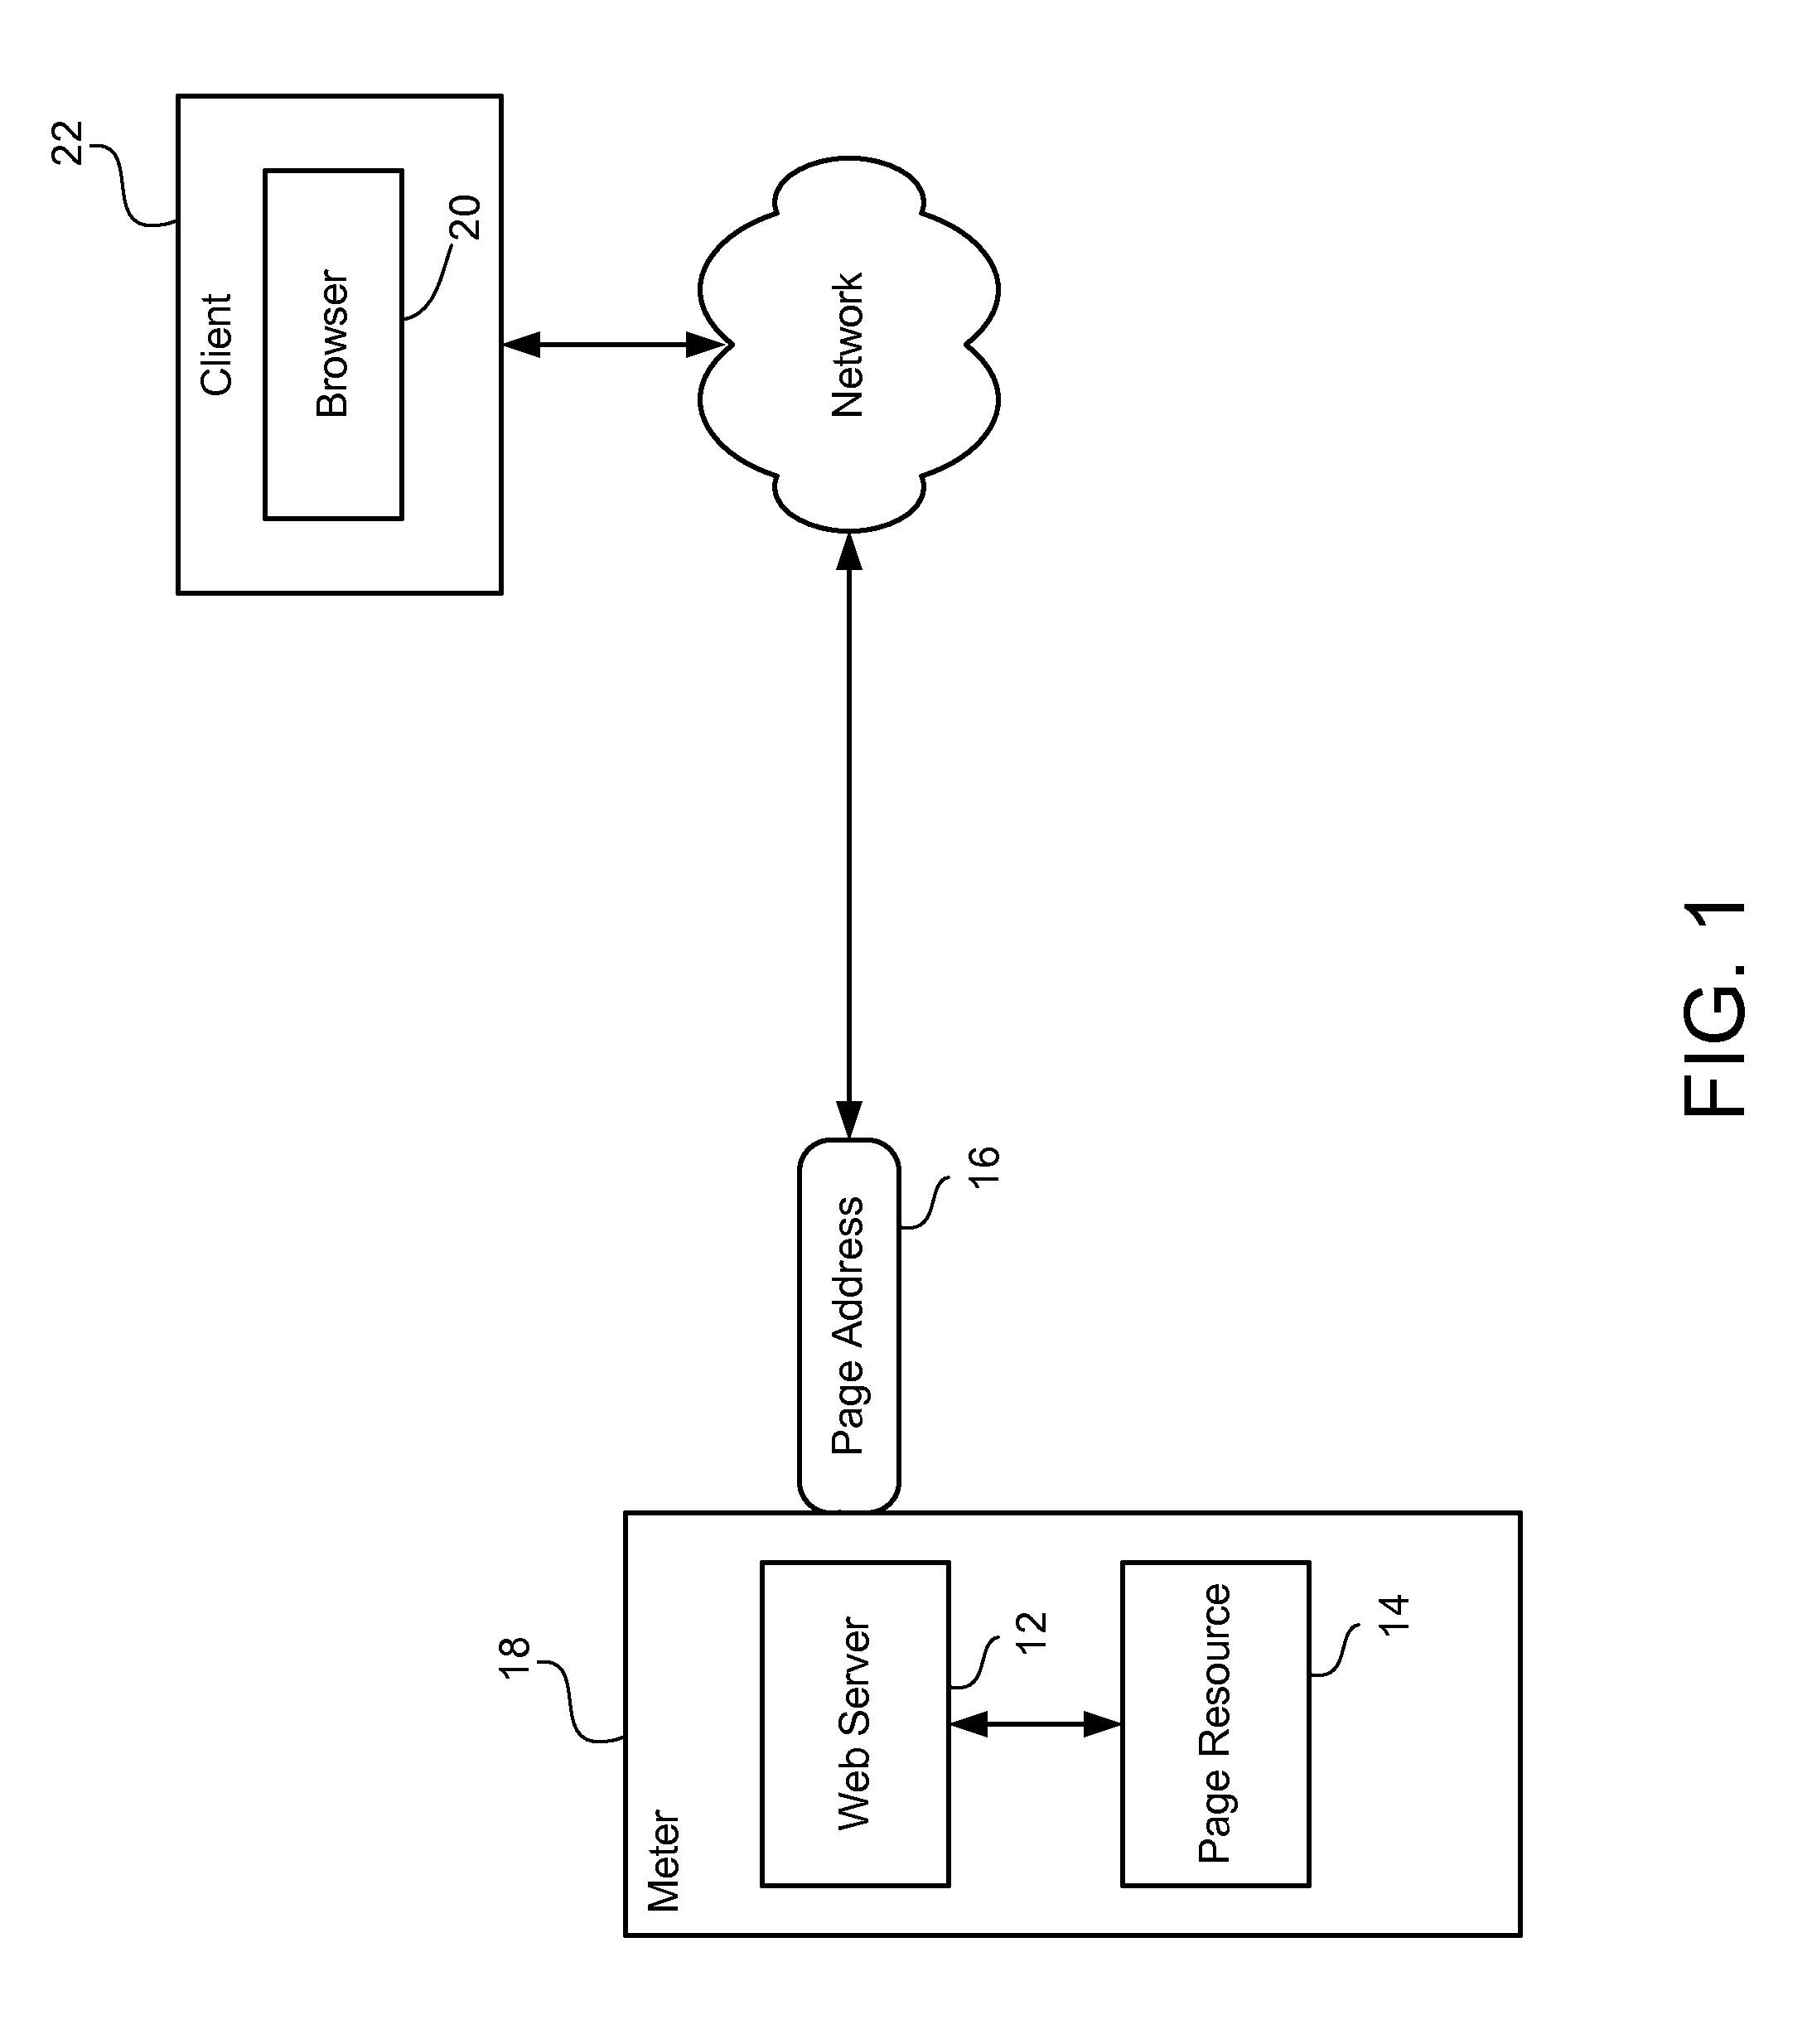 Dynamic webpage interface for an intelligent electronic device